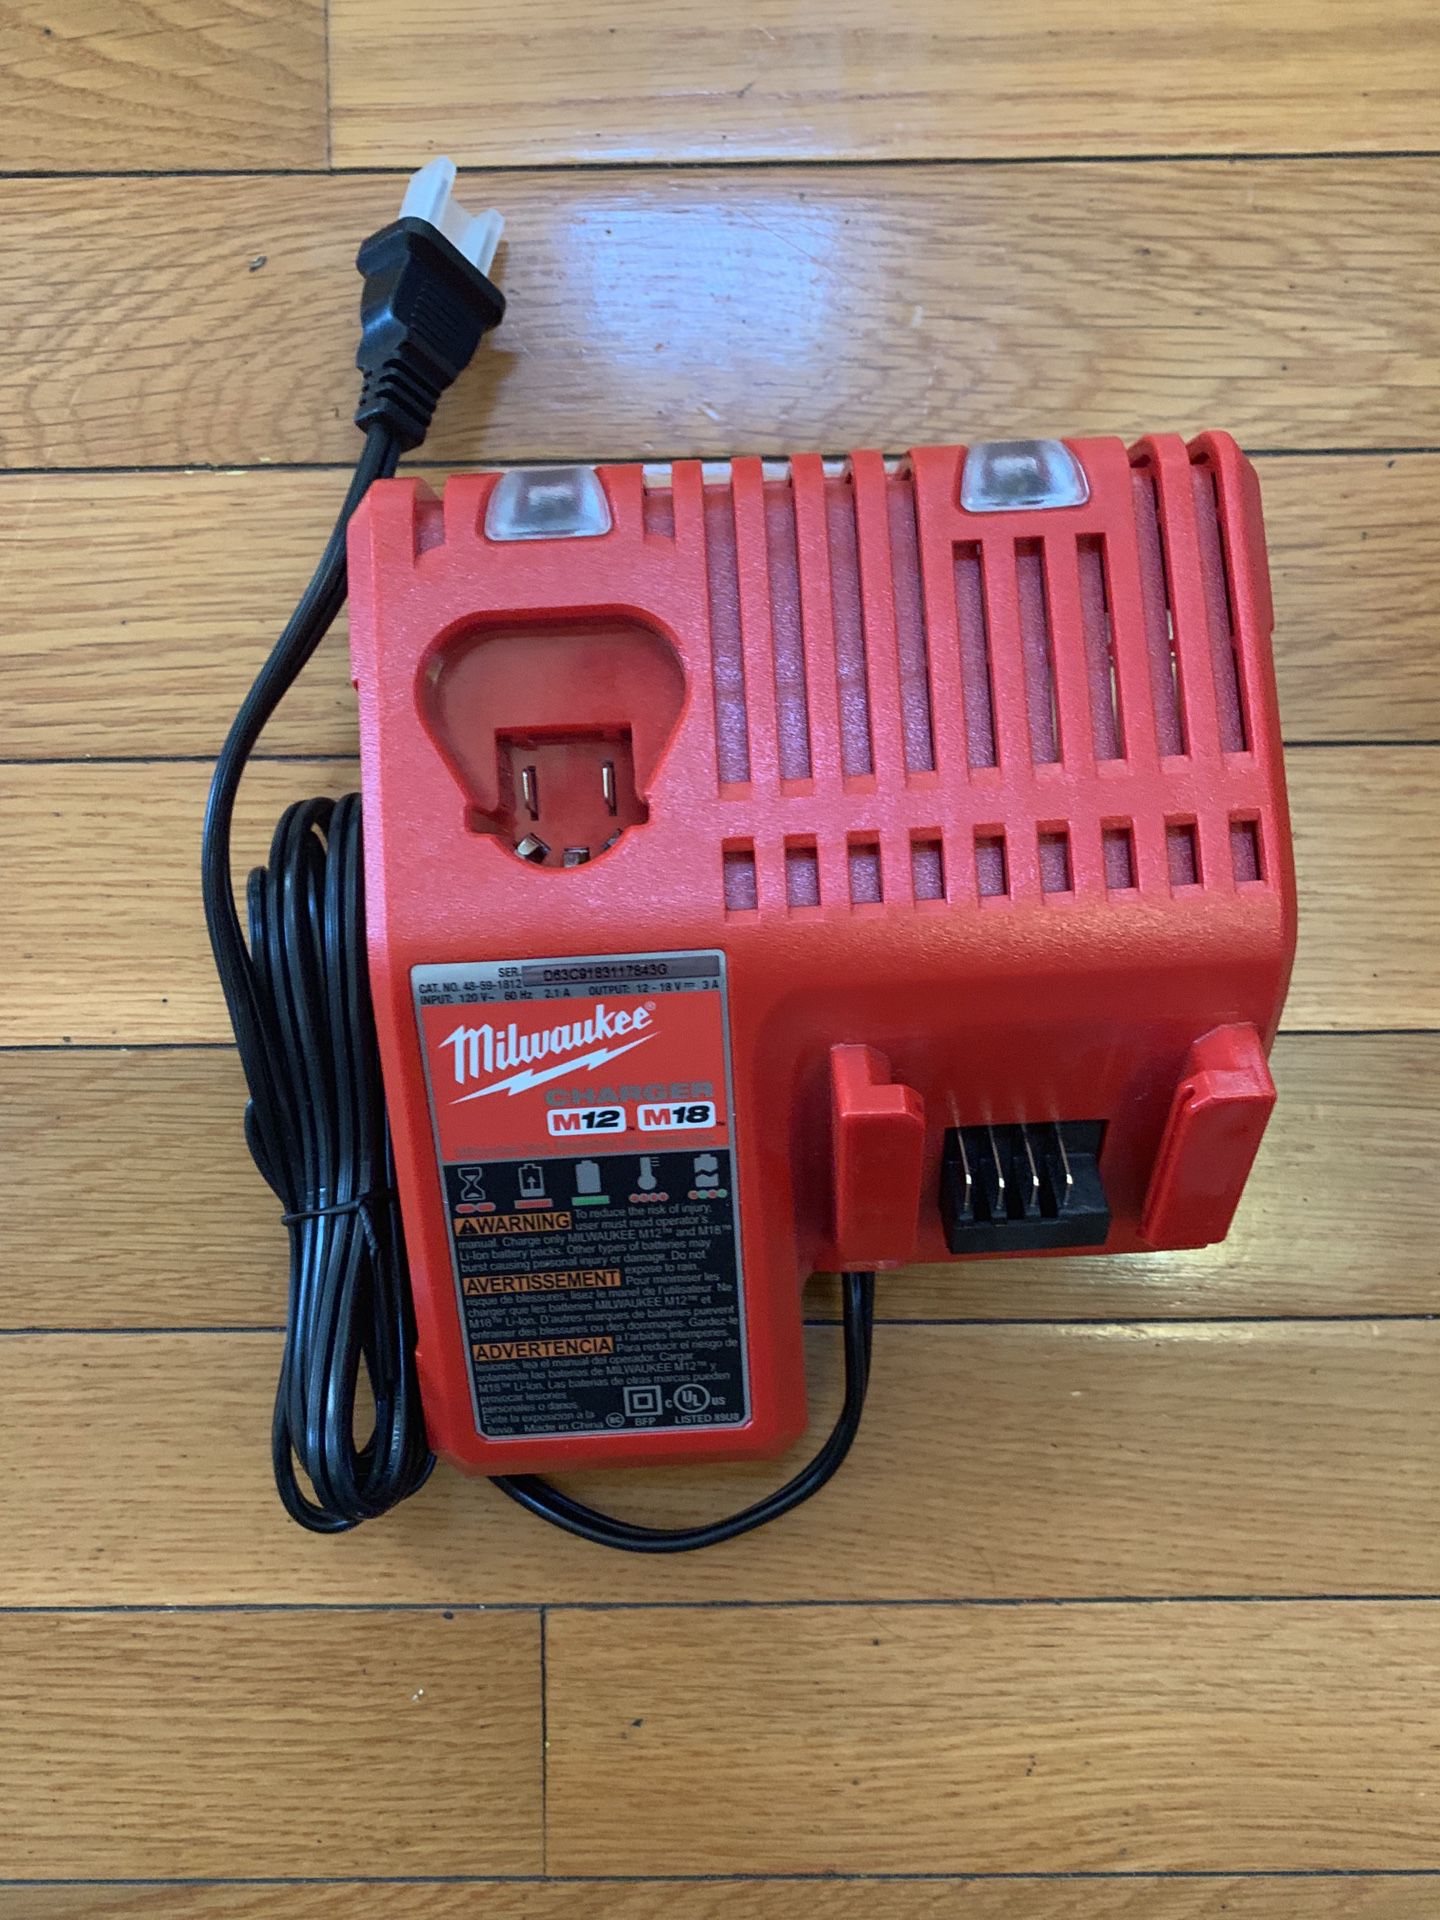 NEW MILWAUKEE M18 CHARGER